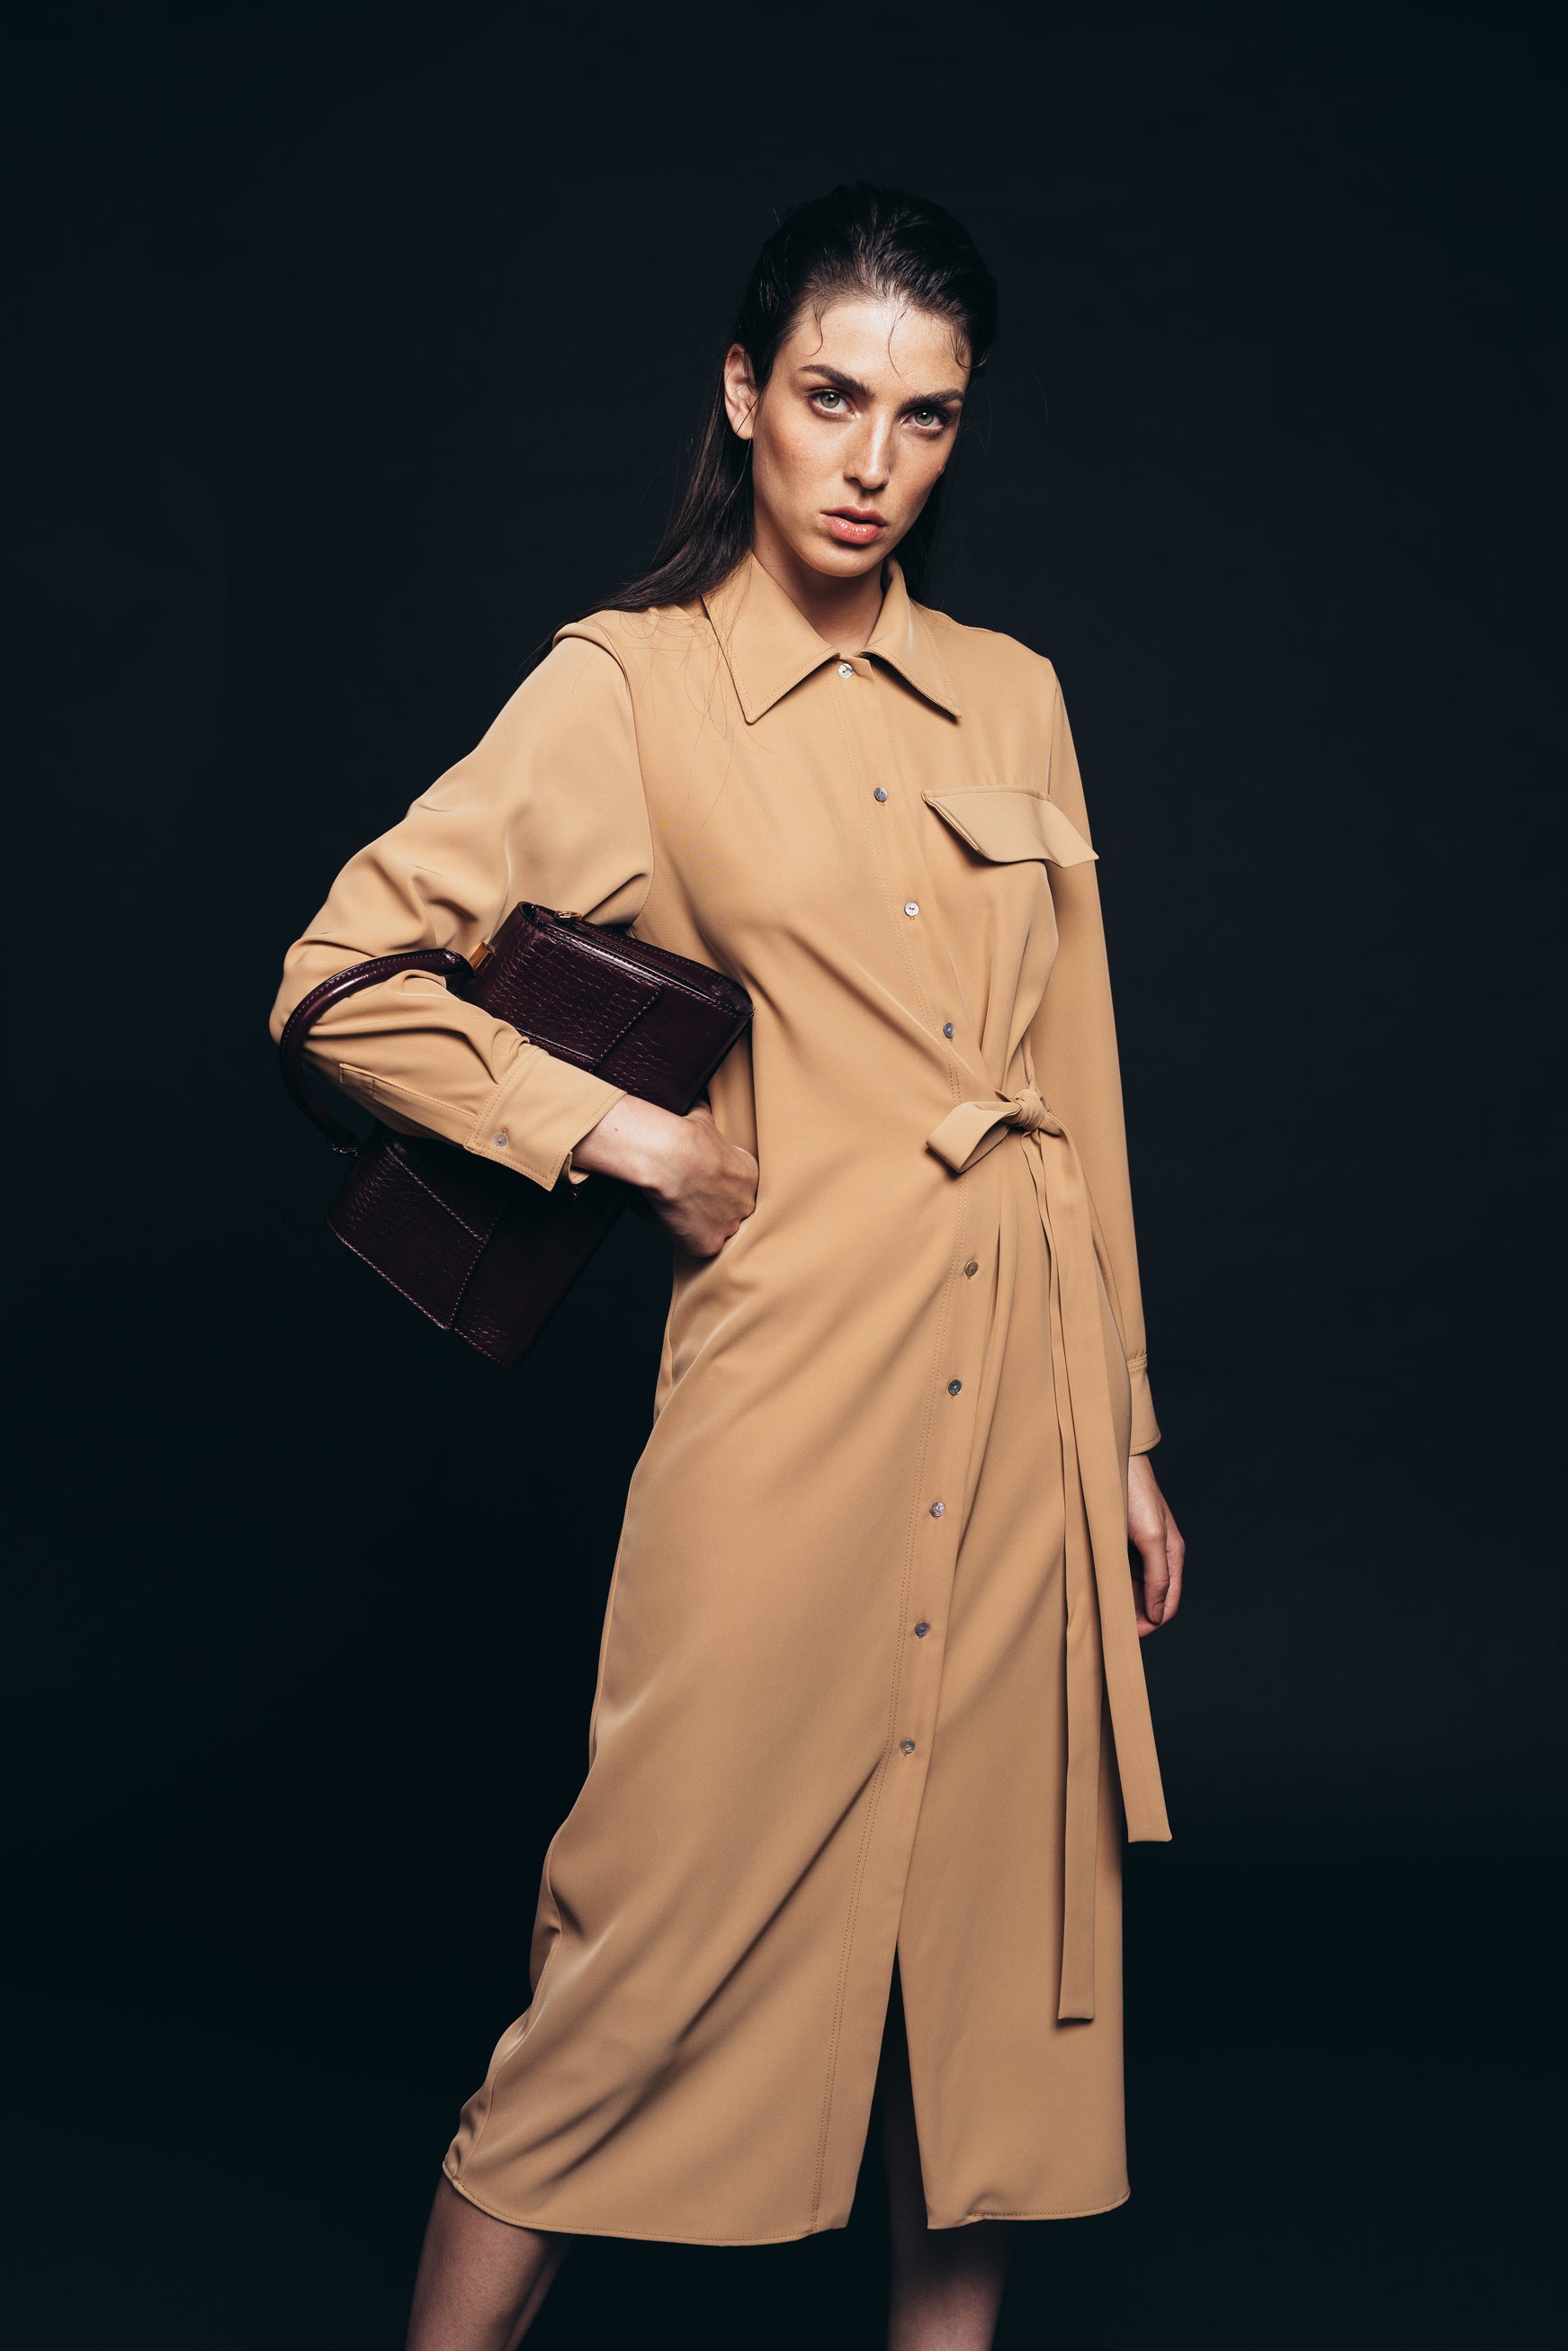 Wrap-style midi dress with long sleeves in camel